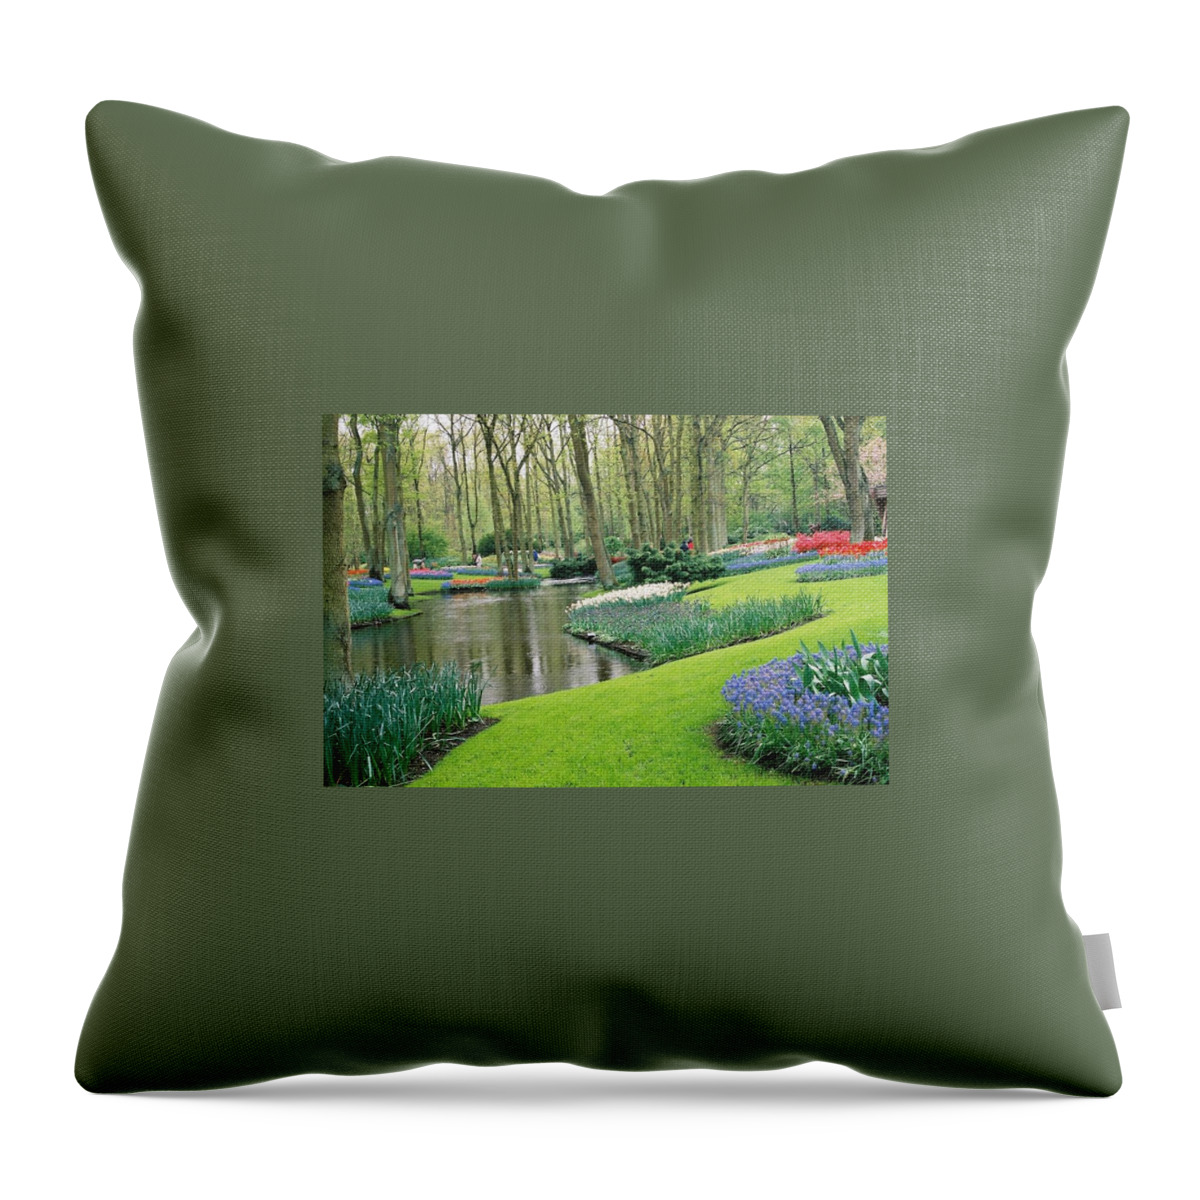  Throw Pillow featuring the photograph Keukenhof Gardens by Susie Rieple